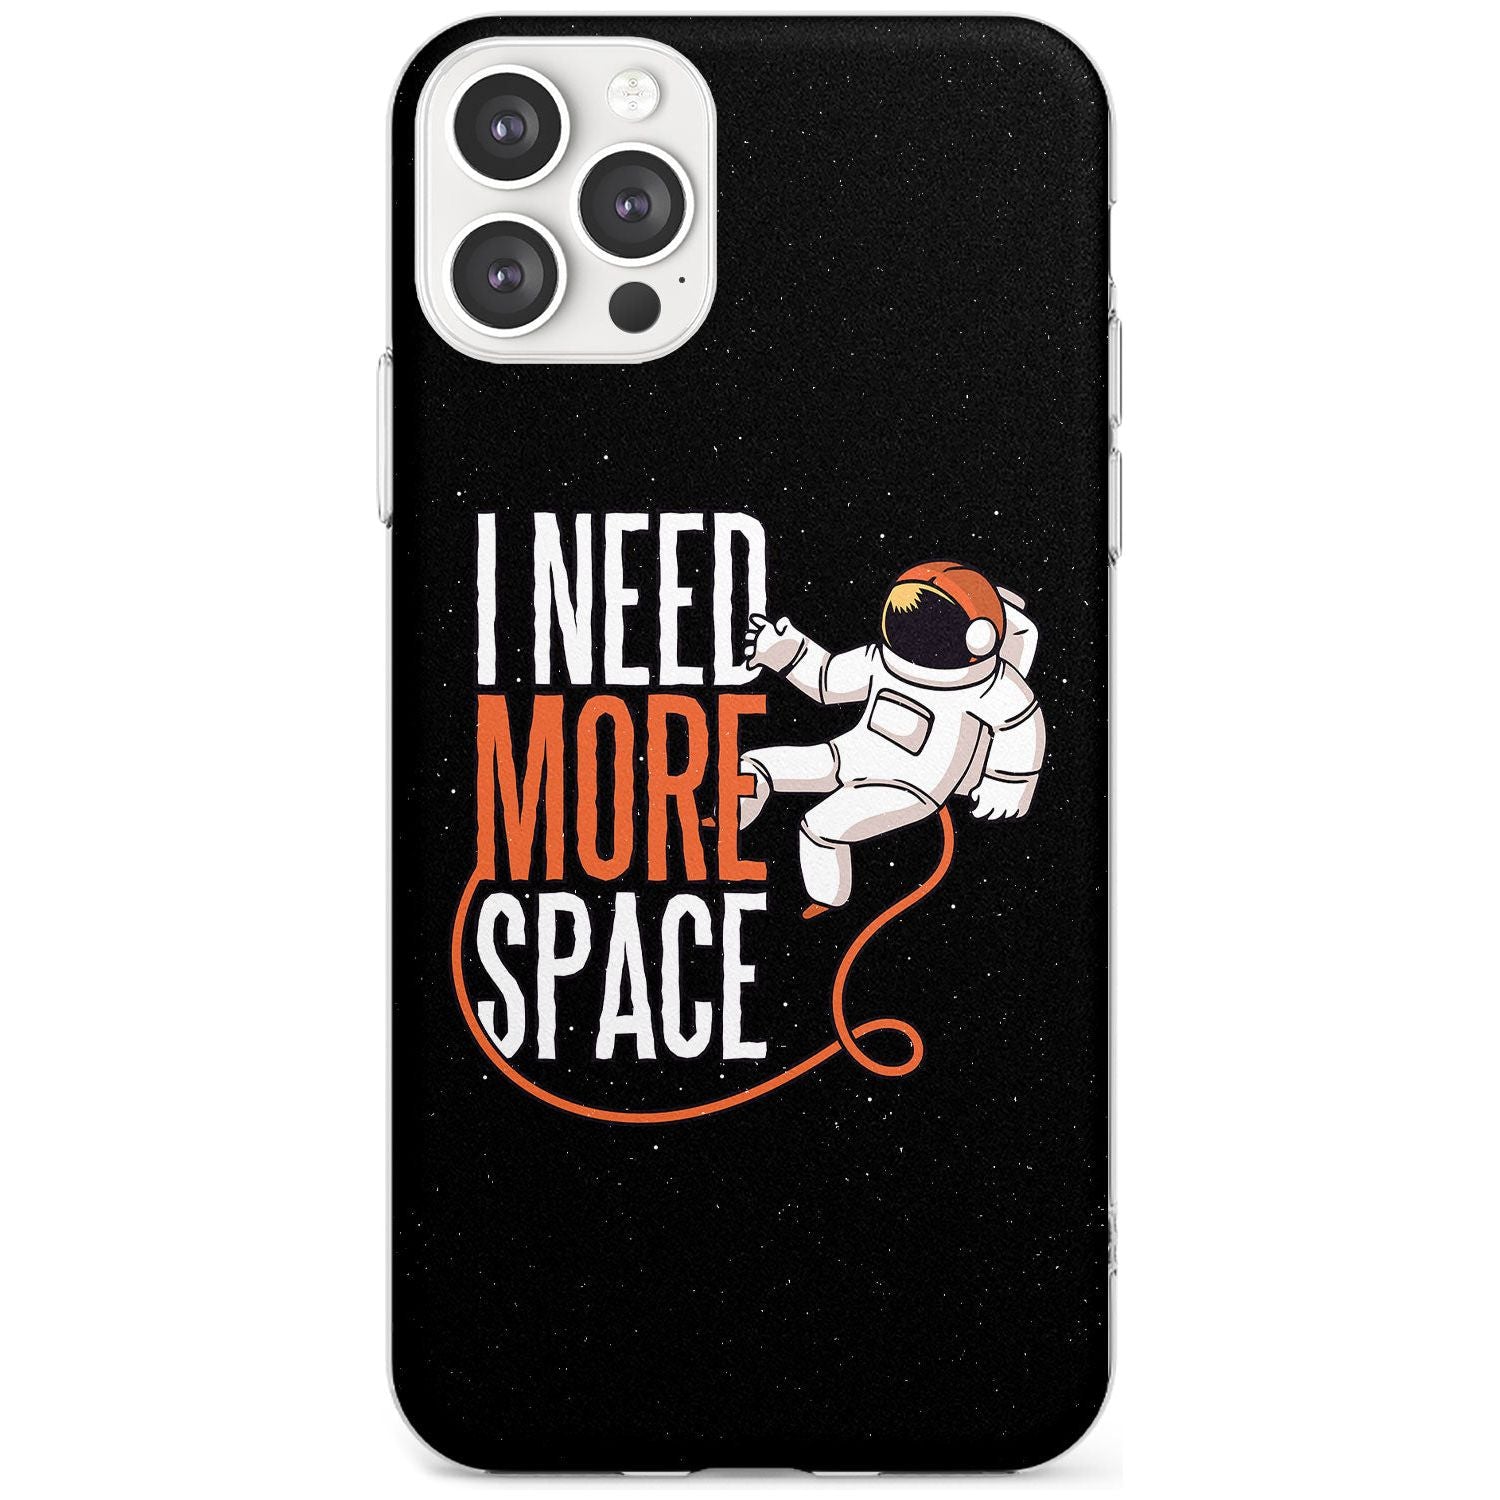 I Need More Space Black Impact Phone Case for iPhone 11 Pro Max